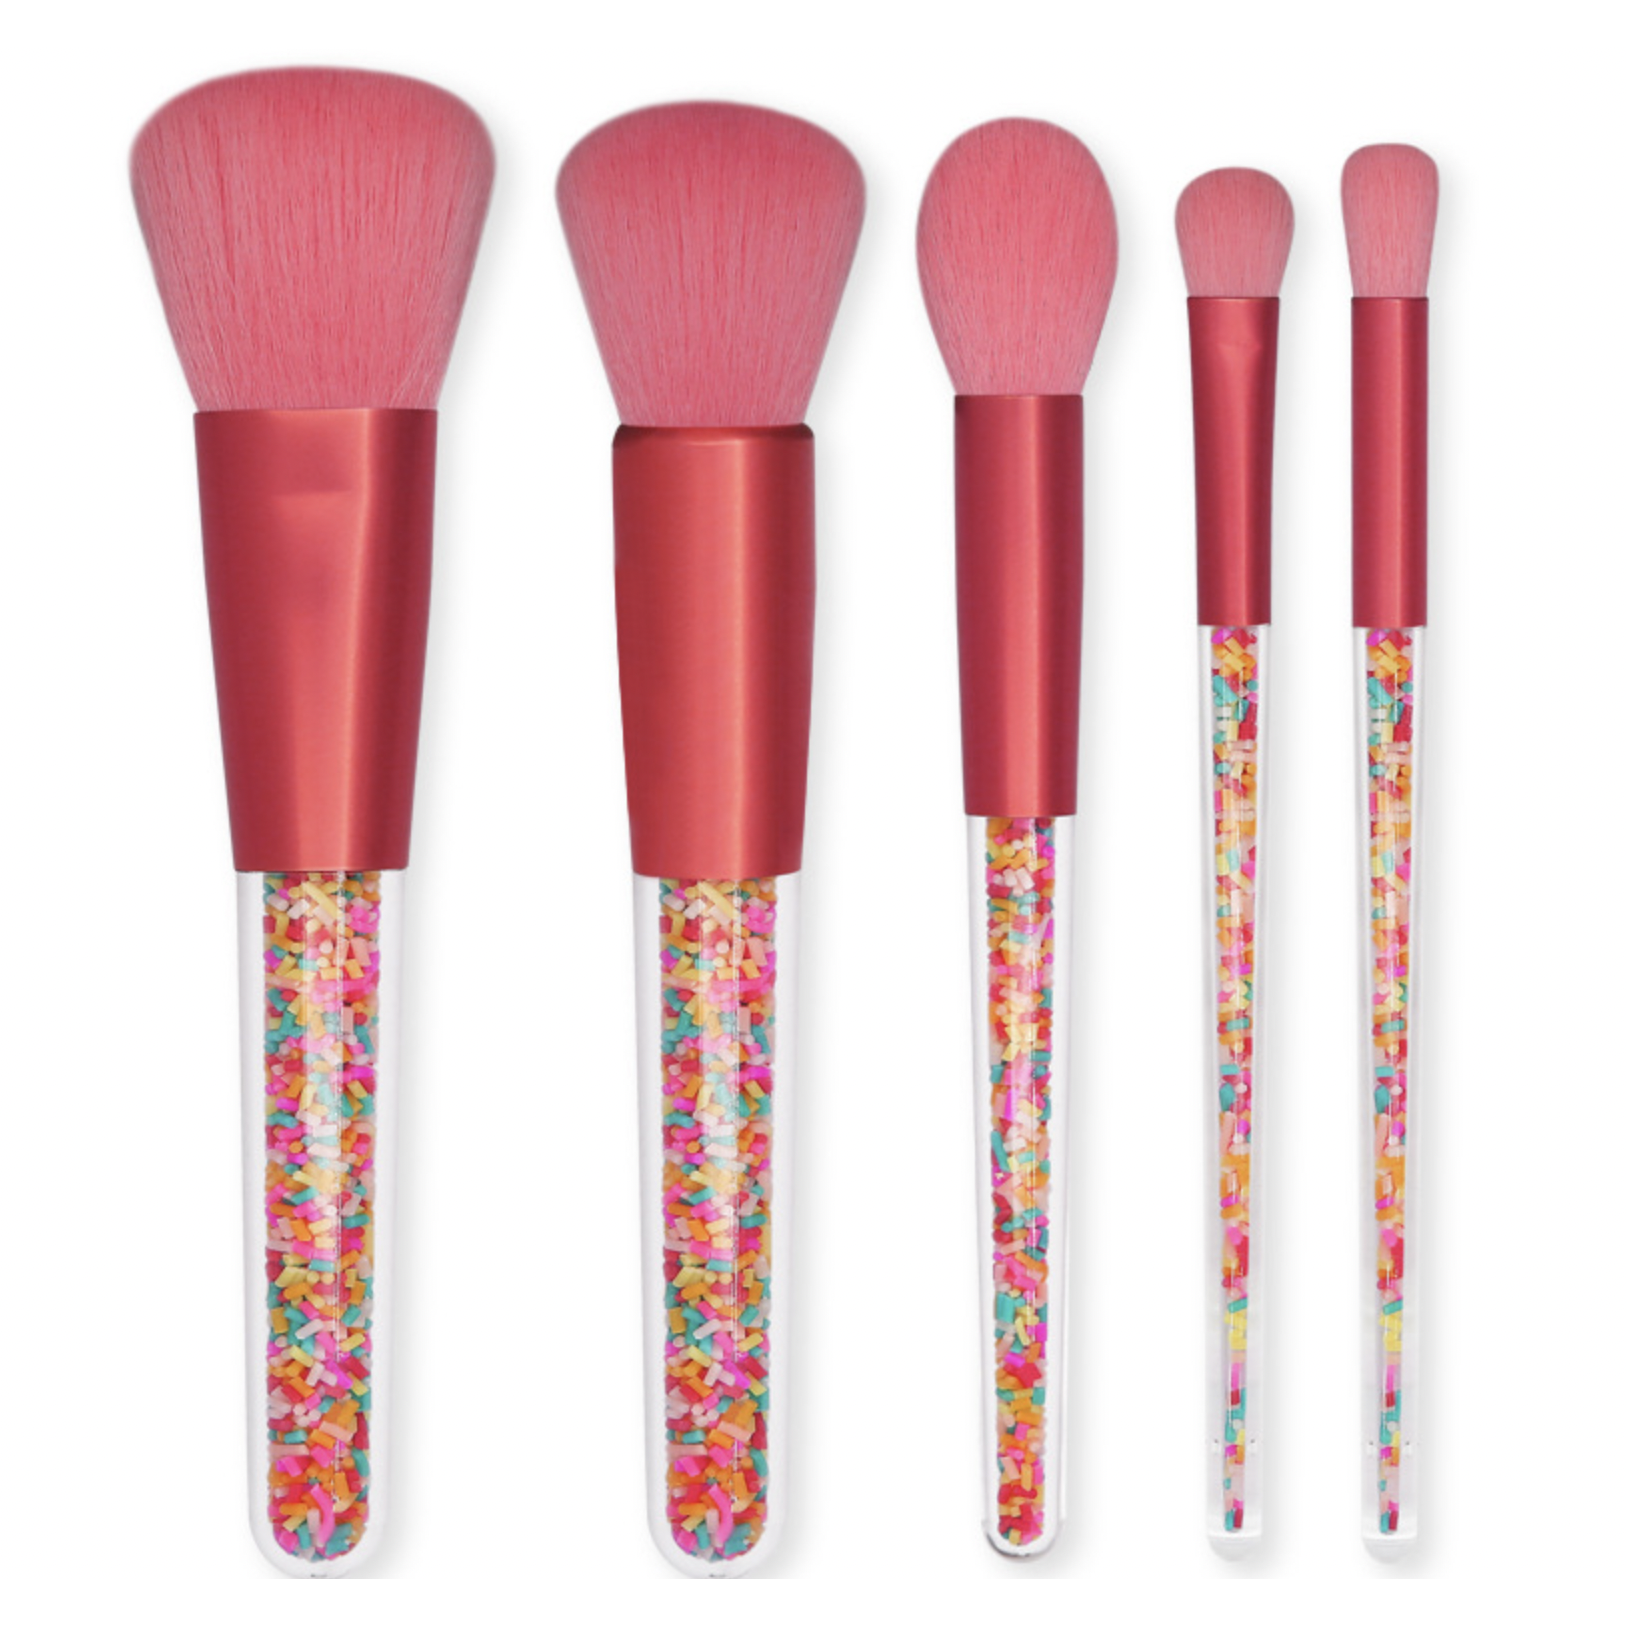 Wilton 5-Piece Decorating Brush Set - Food Safe Decorating Brushes for  Dusting Edible Glitter and Painting with Edible Color on Treats, Synthetic